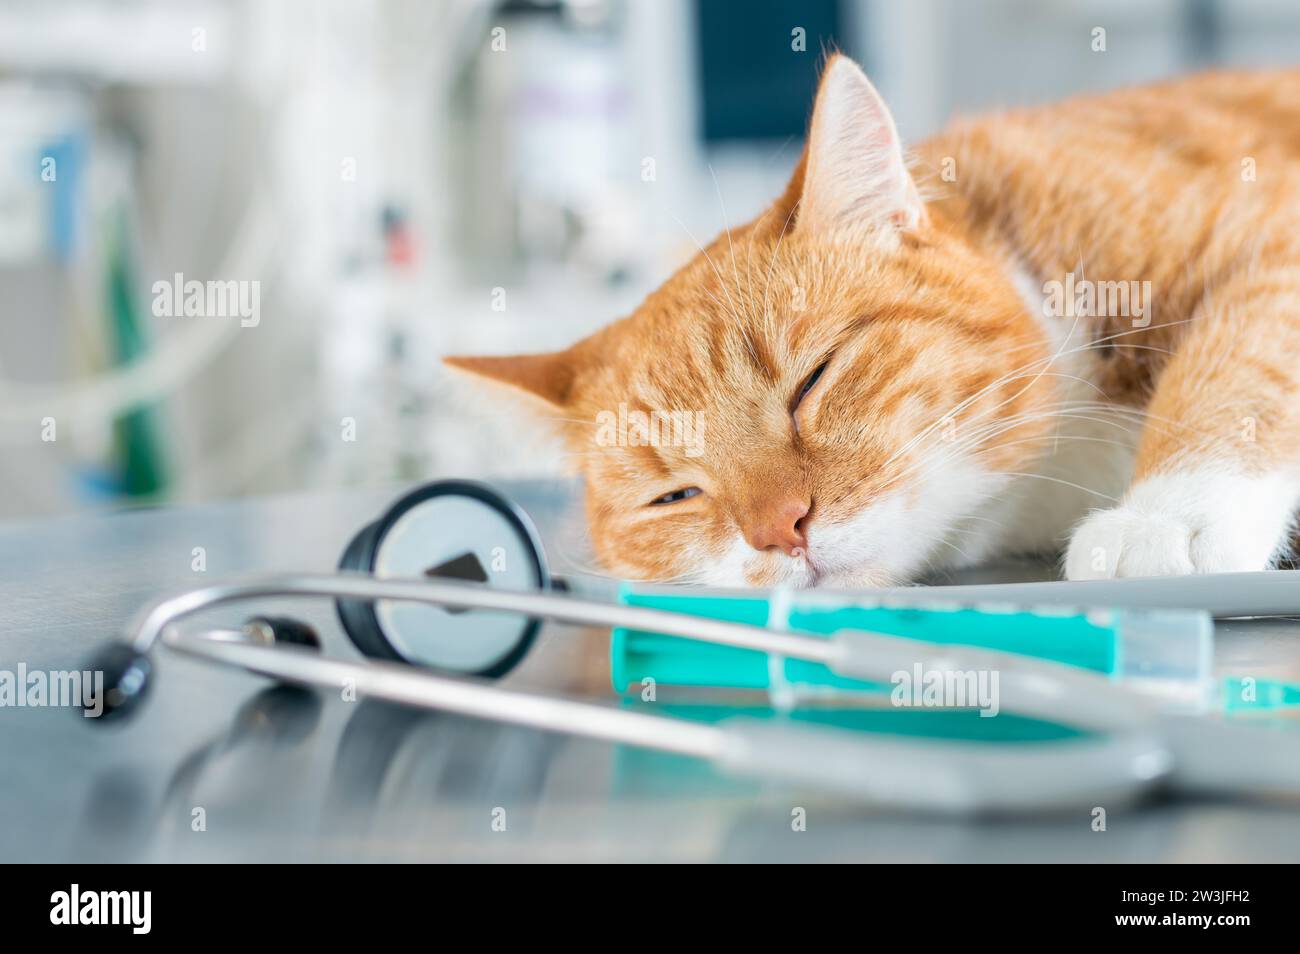 Image of a ginger sleeping cat lying on a table near a syringe and a stethoscope. Veterinary medicine concept. Mixed media Stock Photo